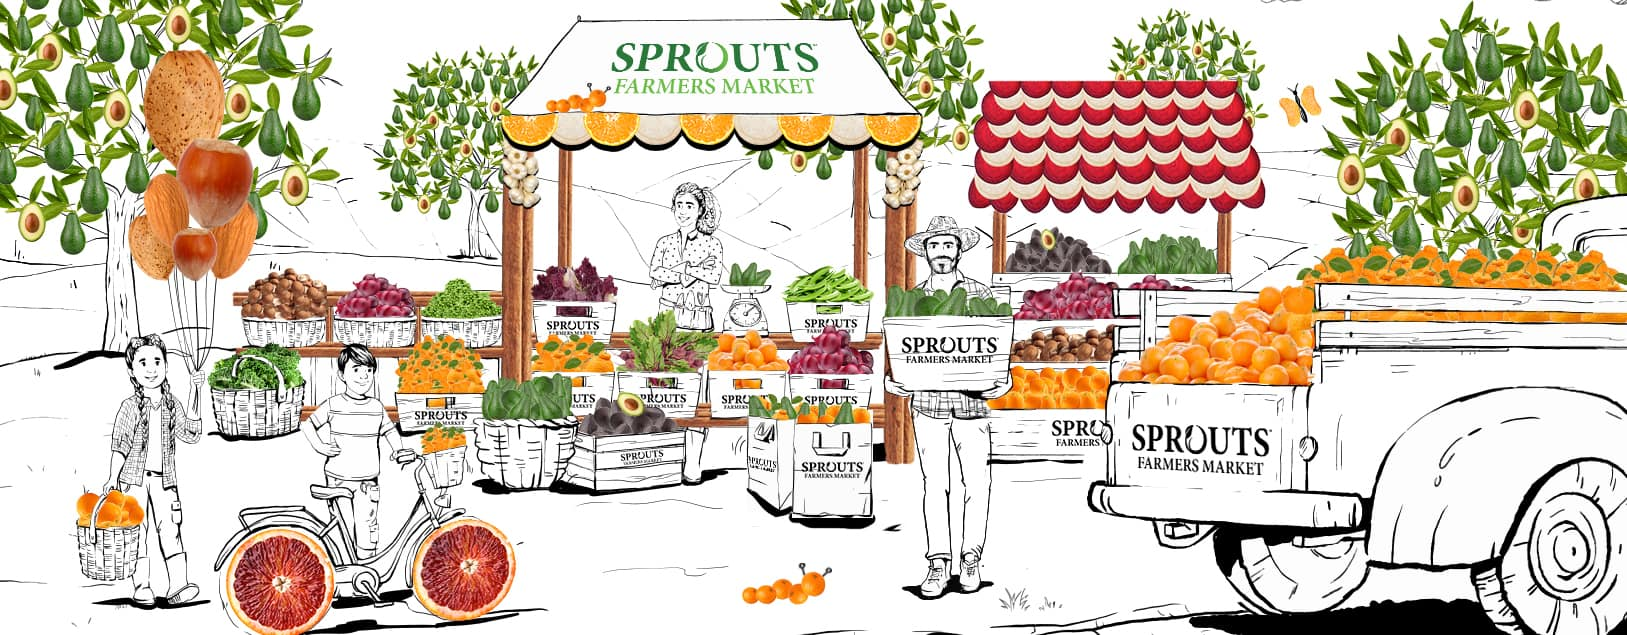 Sprouts Market - Download the app and receive free items at the beginning of ea month